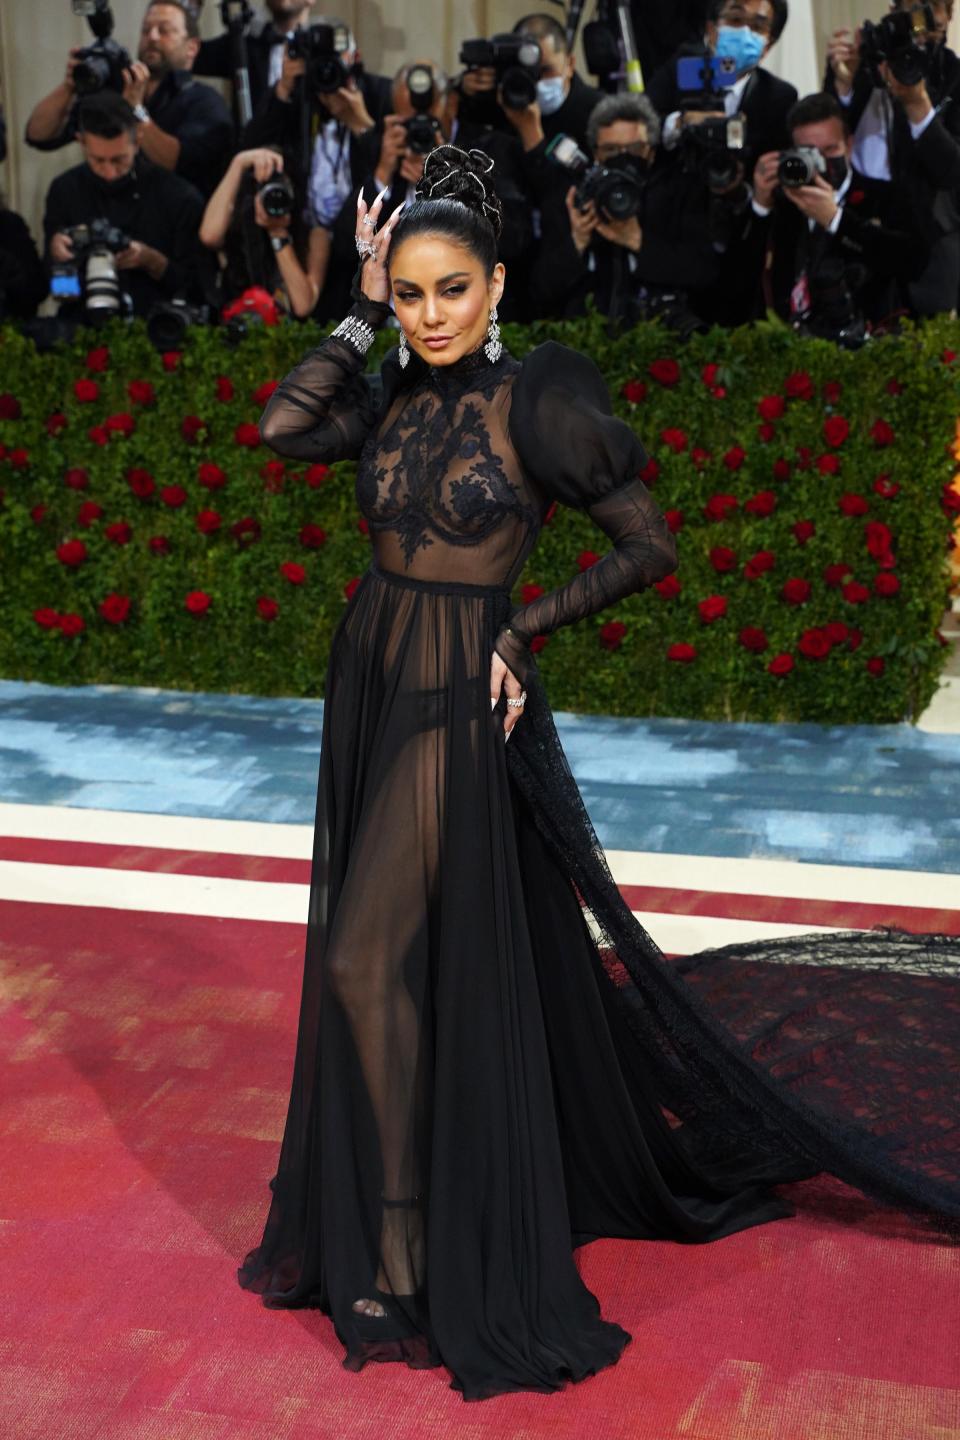 Vanessa Hudgens in a sheer lace gown at the 2022 Met Gala